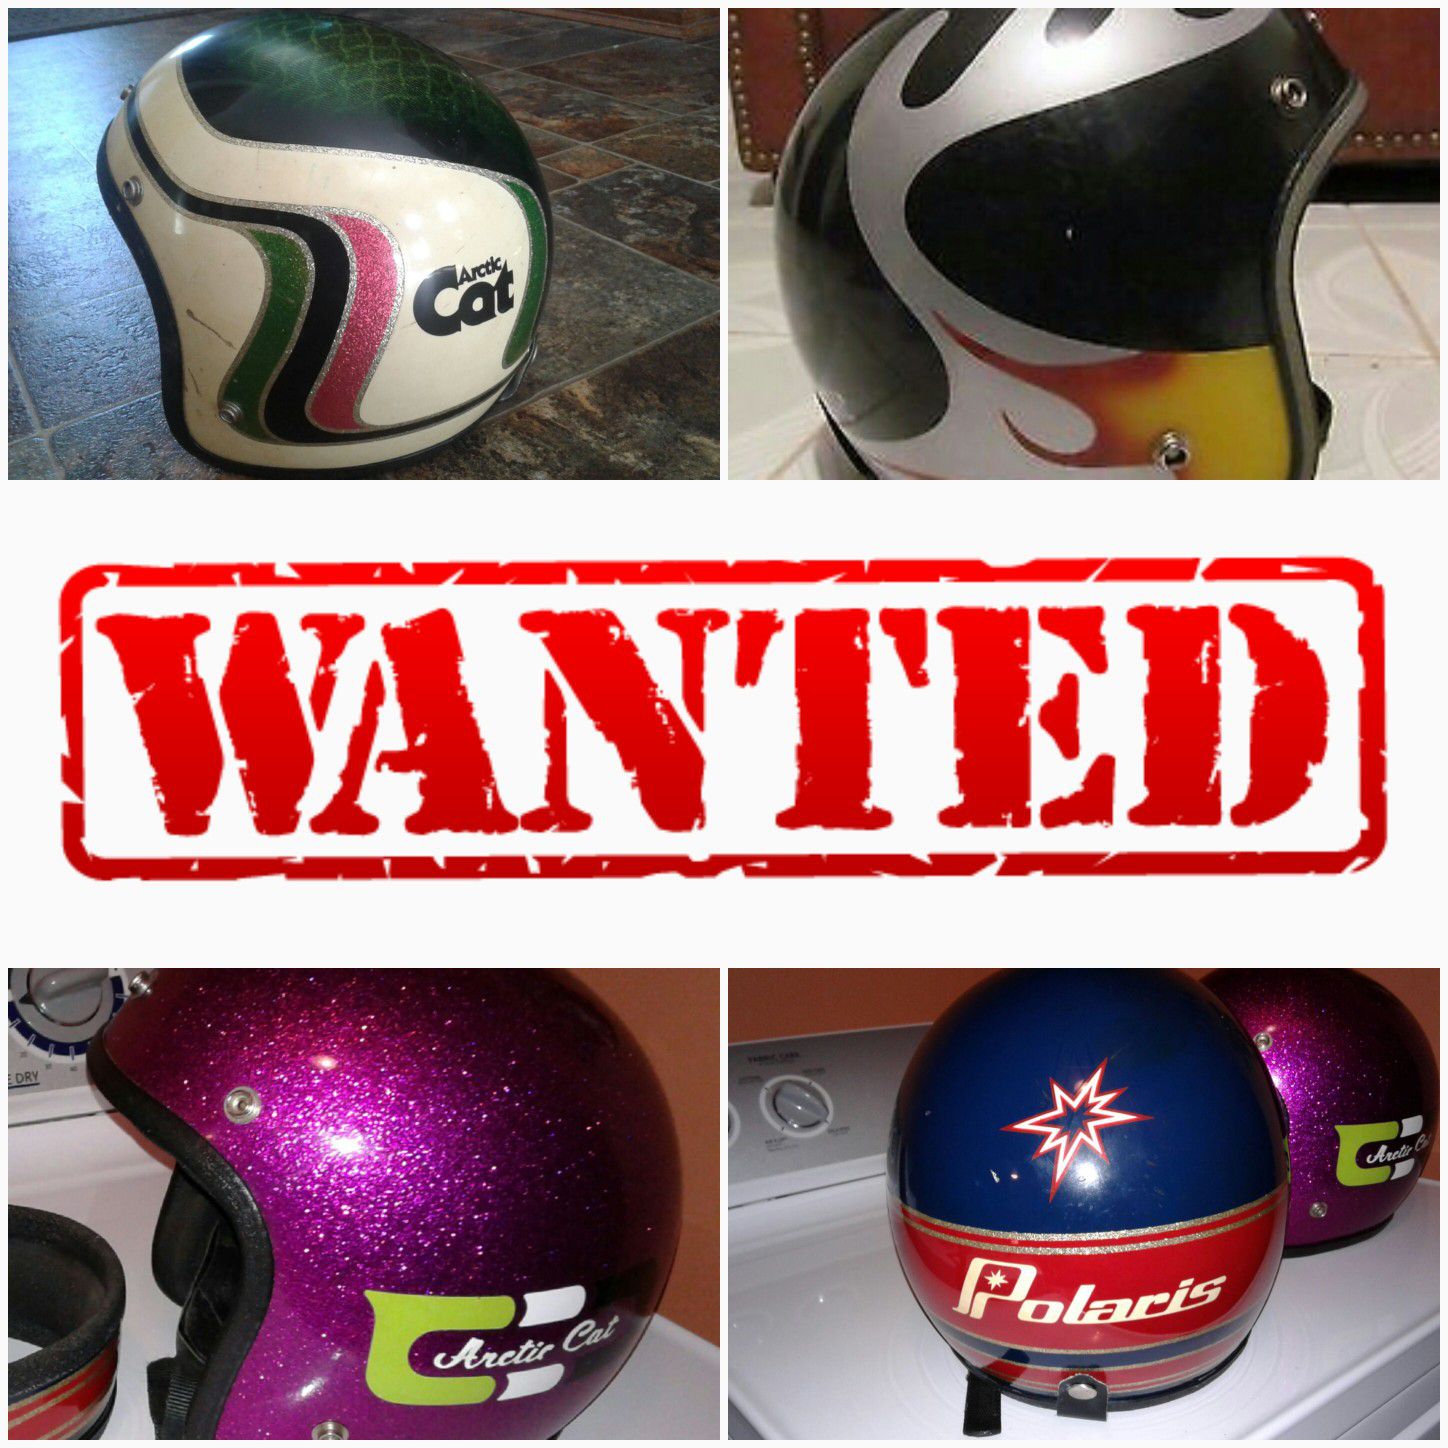 WANTED vintage helmets and snowmobile related items